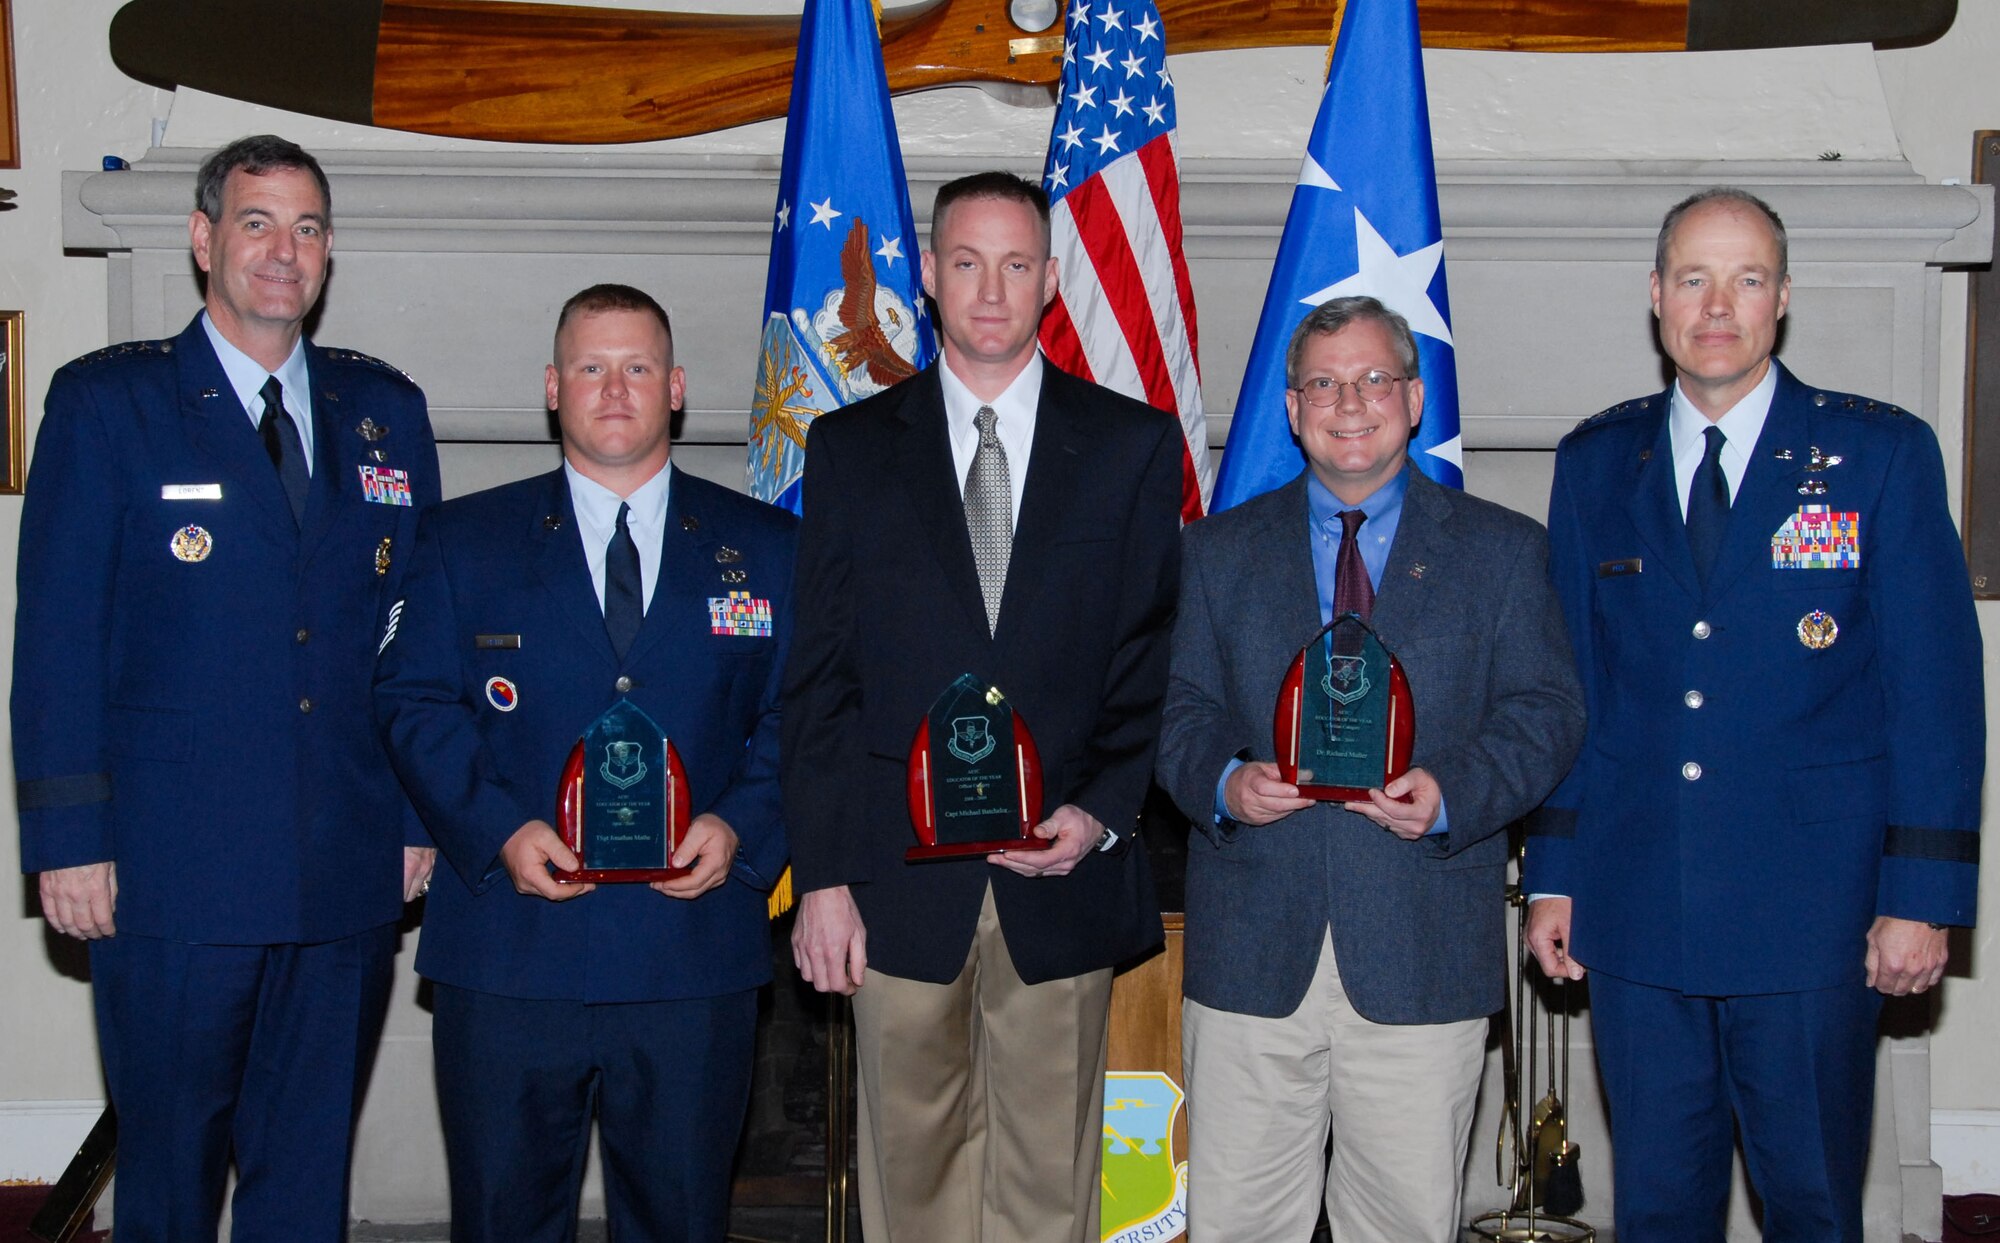 Air Education and Training Command Educator of the Year 2008-2009 awards were presented Nov. 16 at Maxwell’s Officers Club by AETC Commander Gen. Stephen Lorenz (far left). Receiving the awards (from left) are Tech. Sgt. Jonathan Mathe in the enlisted category, Capt. Michael Batchelor in the officer category and Dr. Richard Muller in the civilian category. Also shown is Lt. Gen. Allen G. Peck, commander of Air University. (U.S. Air Force photo/Bud Hancock) 
